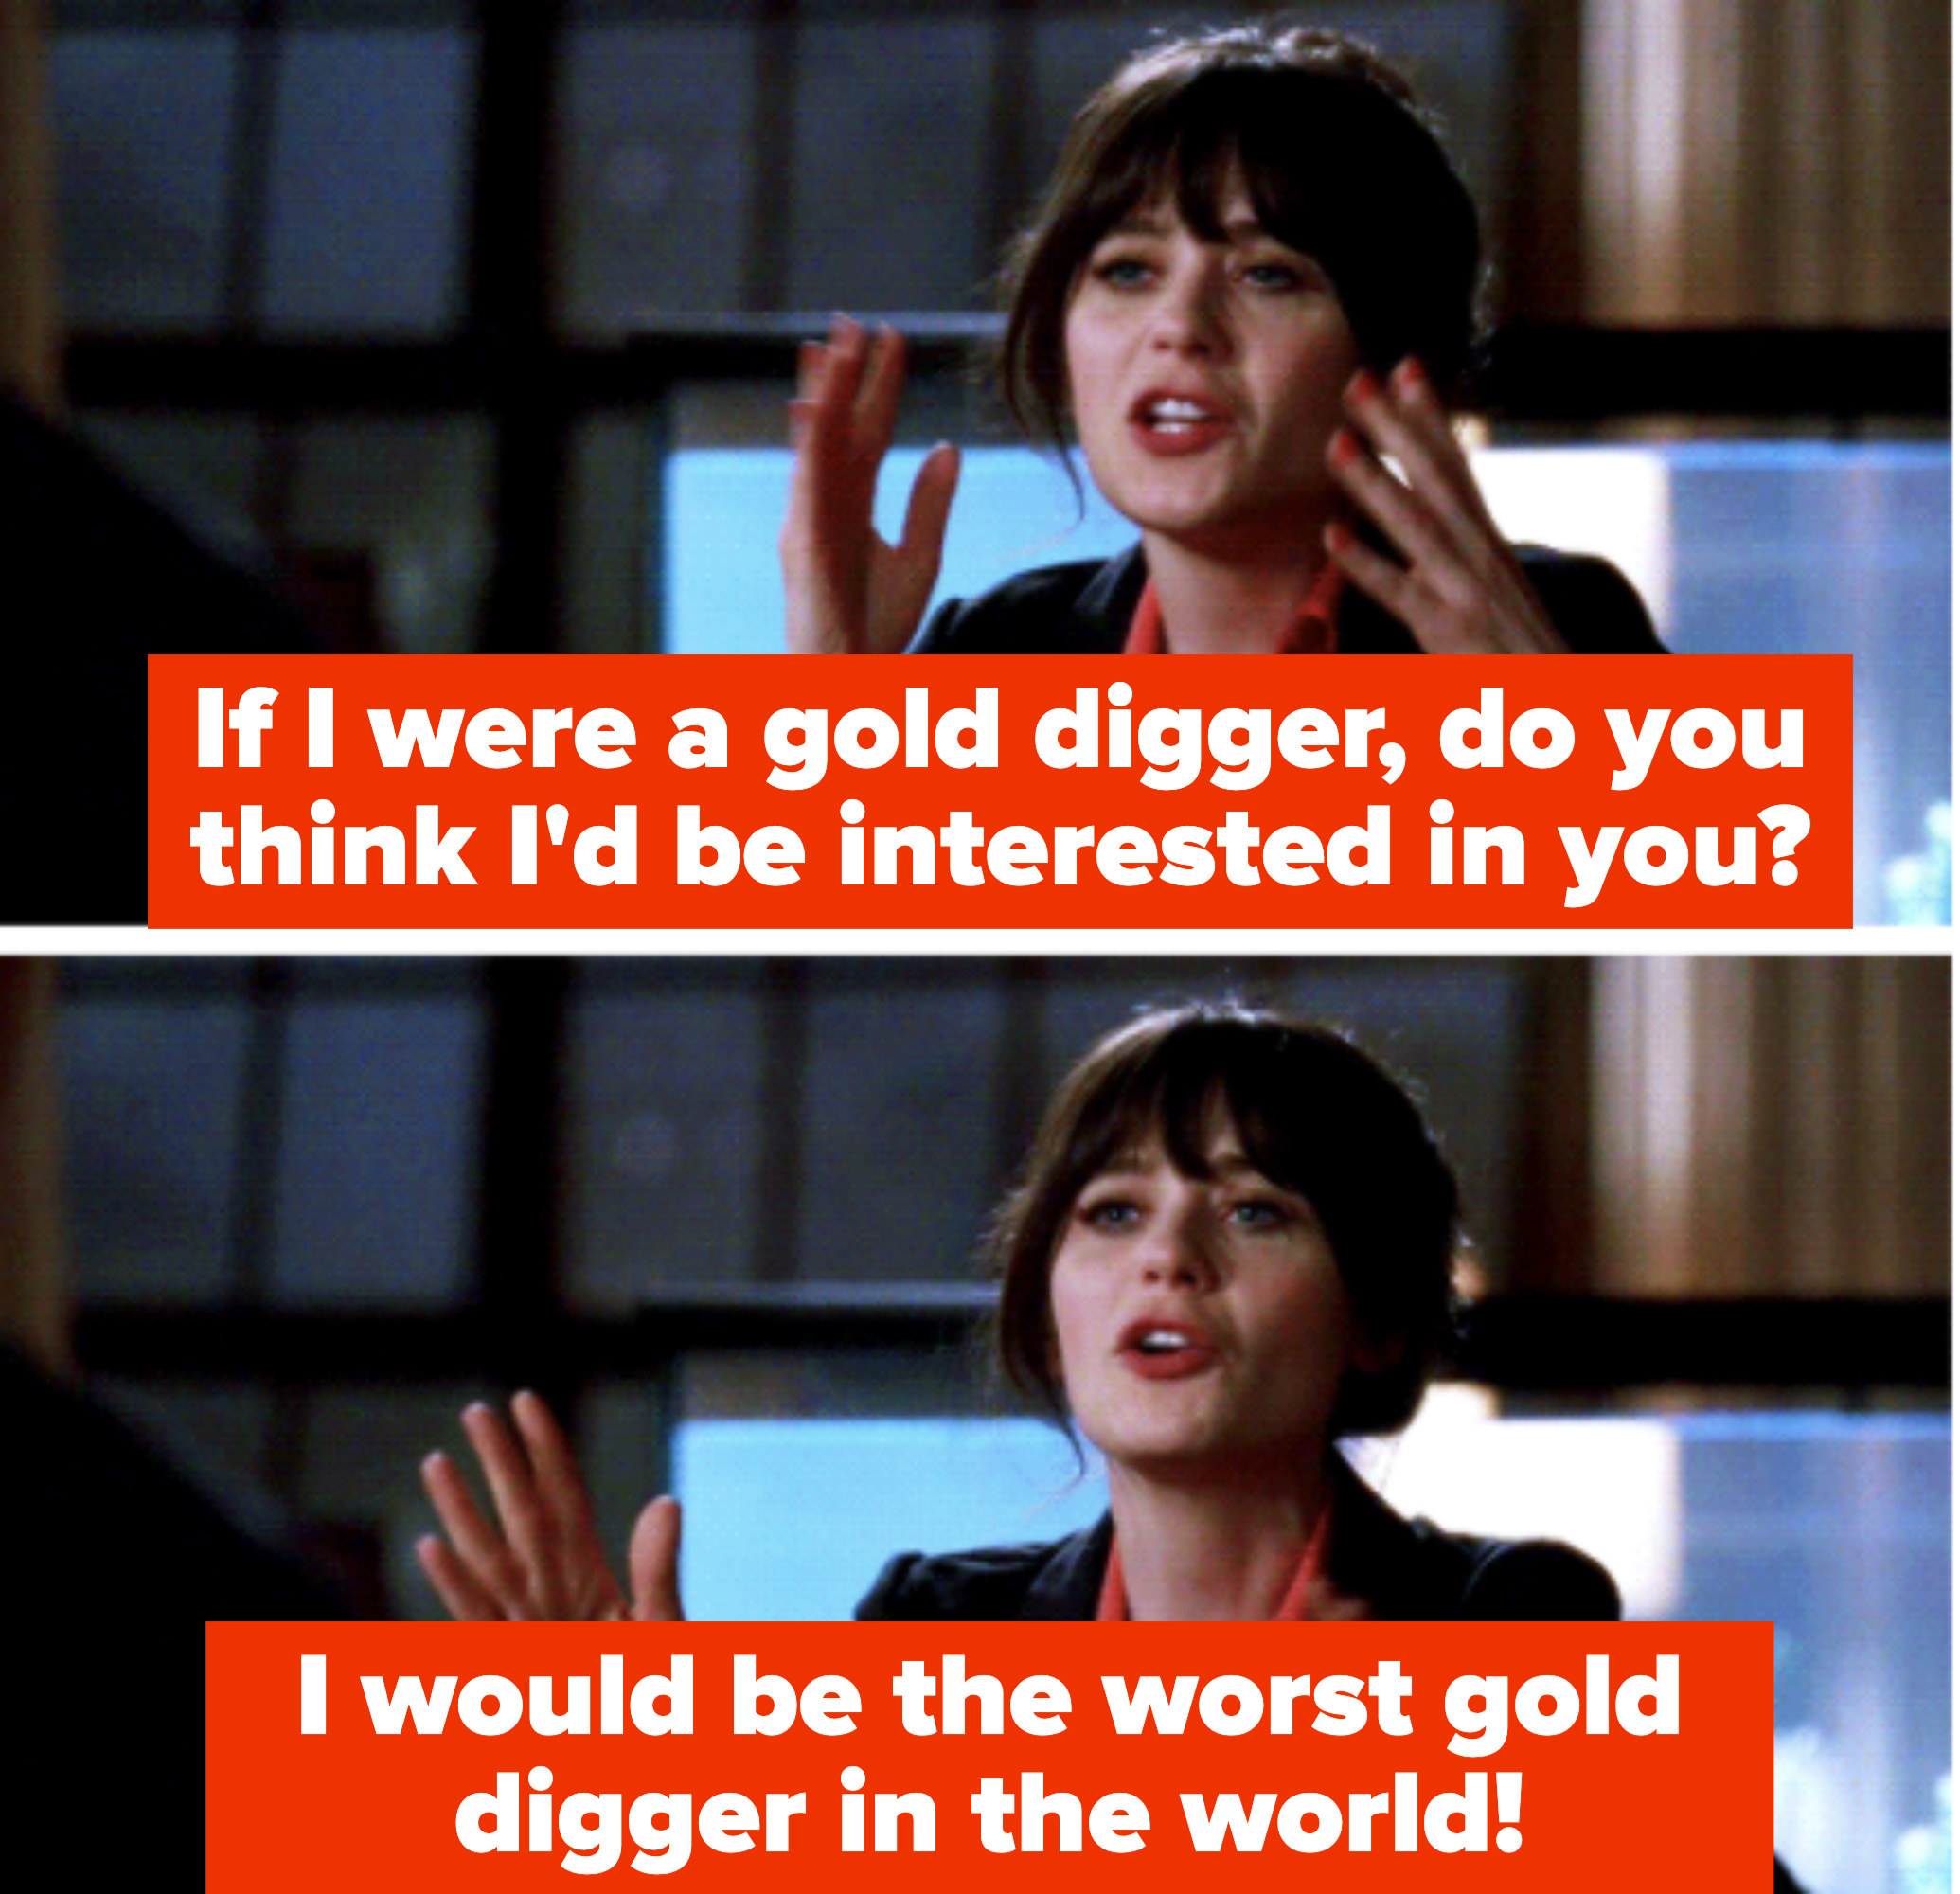 Jess says, &quot;If I were a gold digger, do you think I&#x27;d be interested in you? I would be the worst gold digger in the world!&quot;